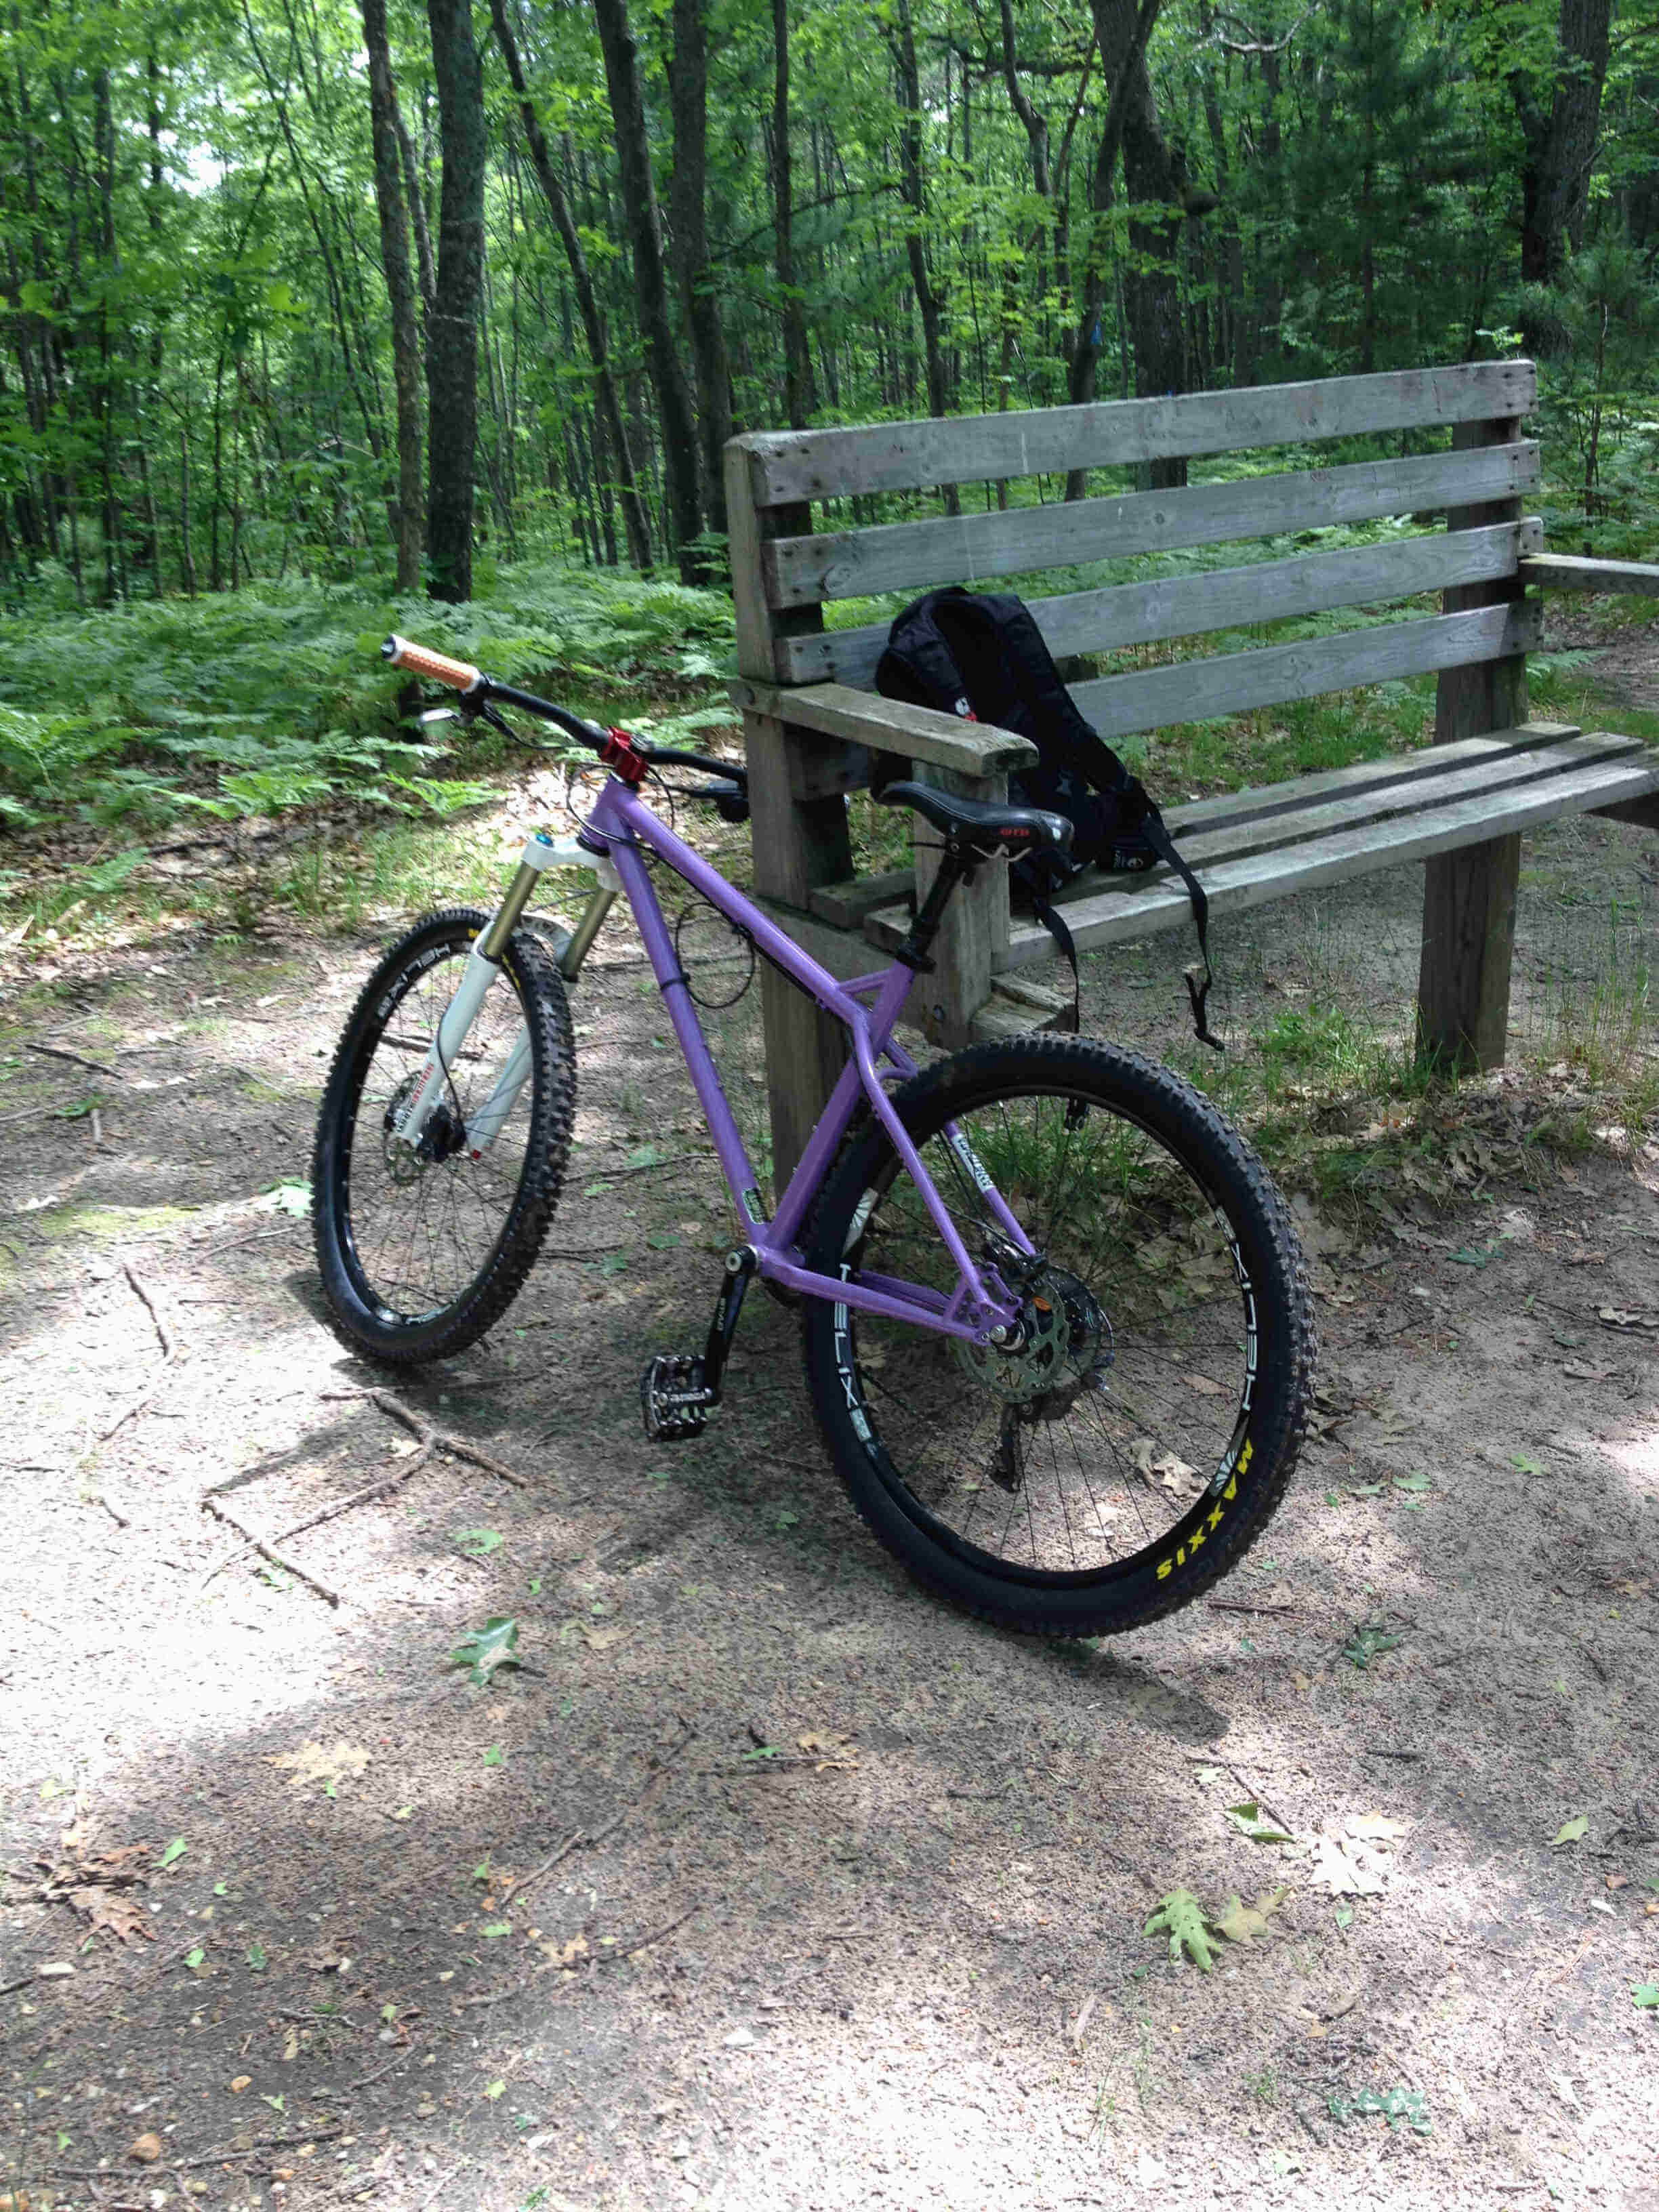 Left side view of a purple Surly Instigator bike, parked on the end a park bench, in a dirt clearing of forest